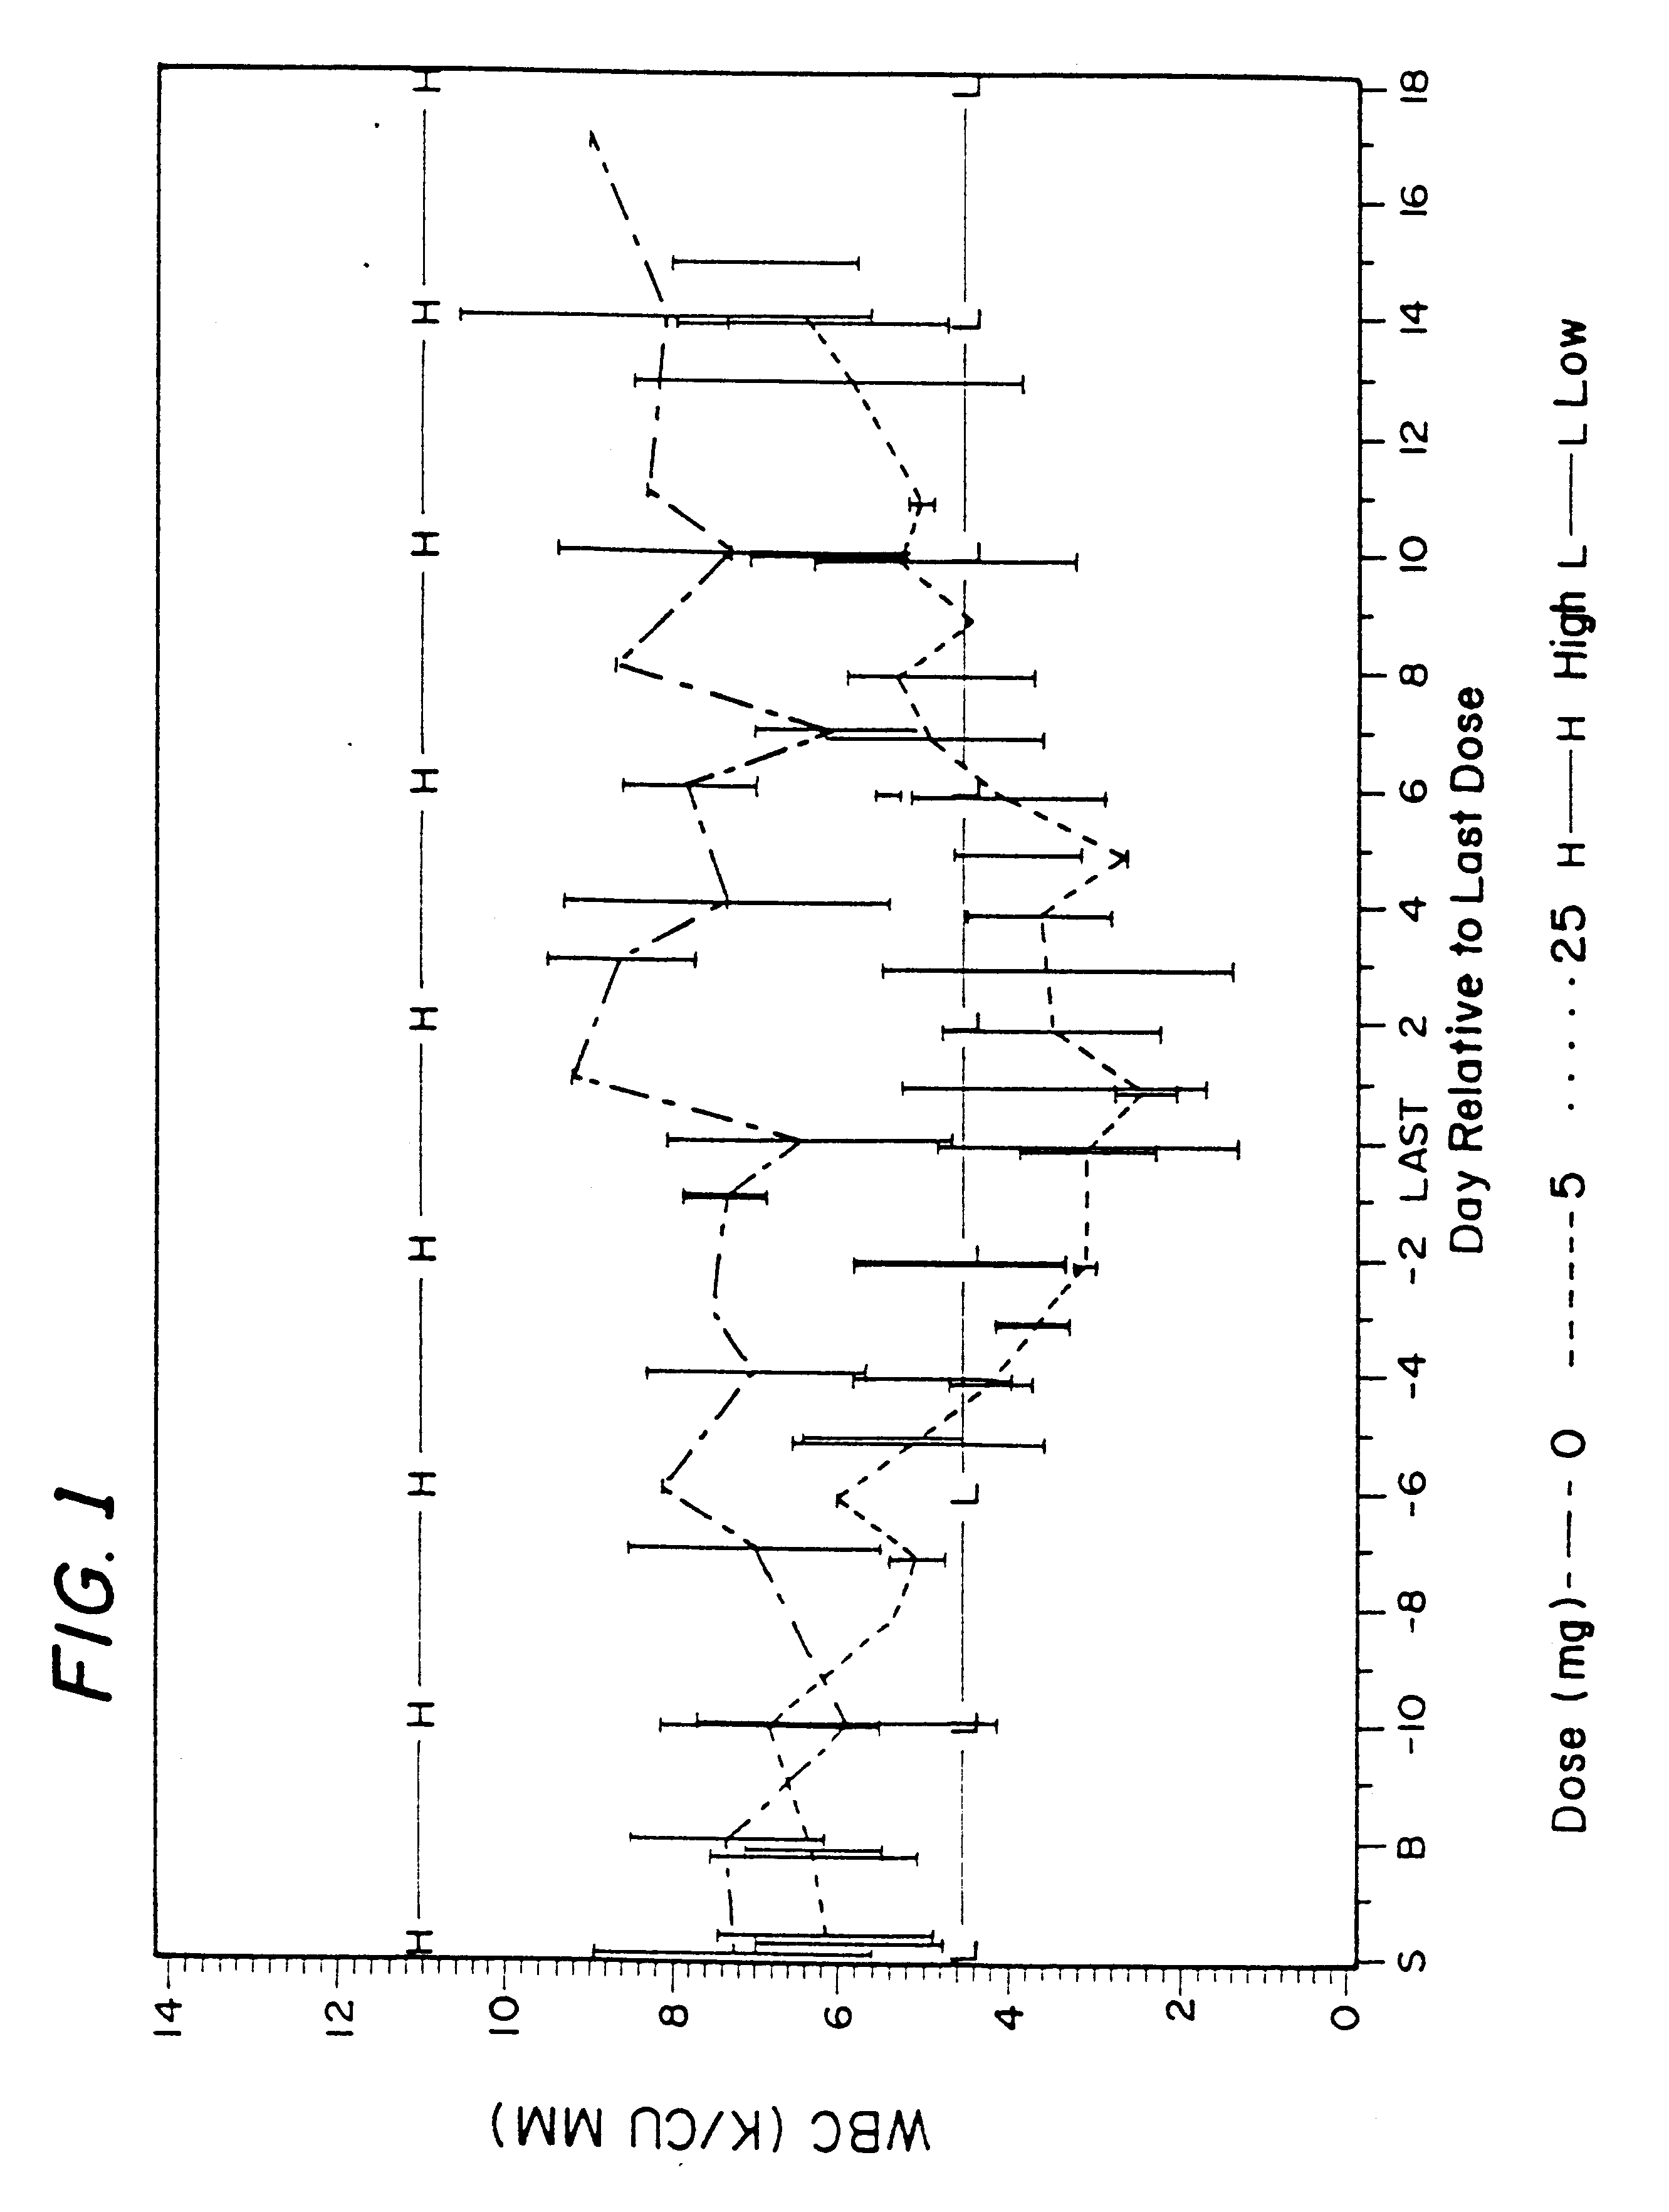 Method for treatment of bacterial infections with once or twice-weekly administered rifalazil